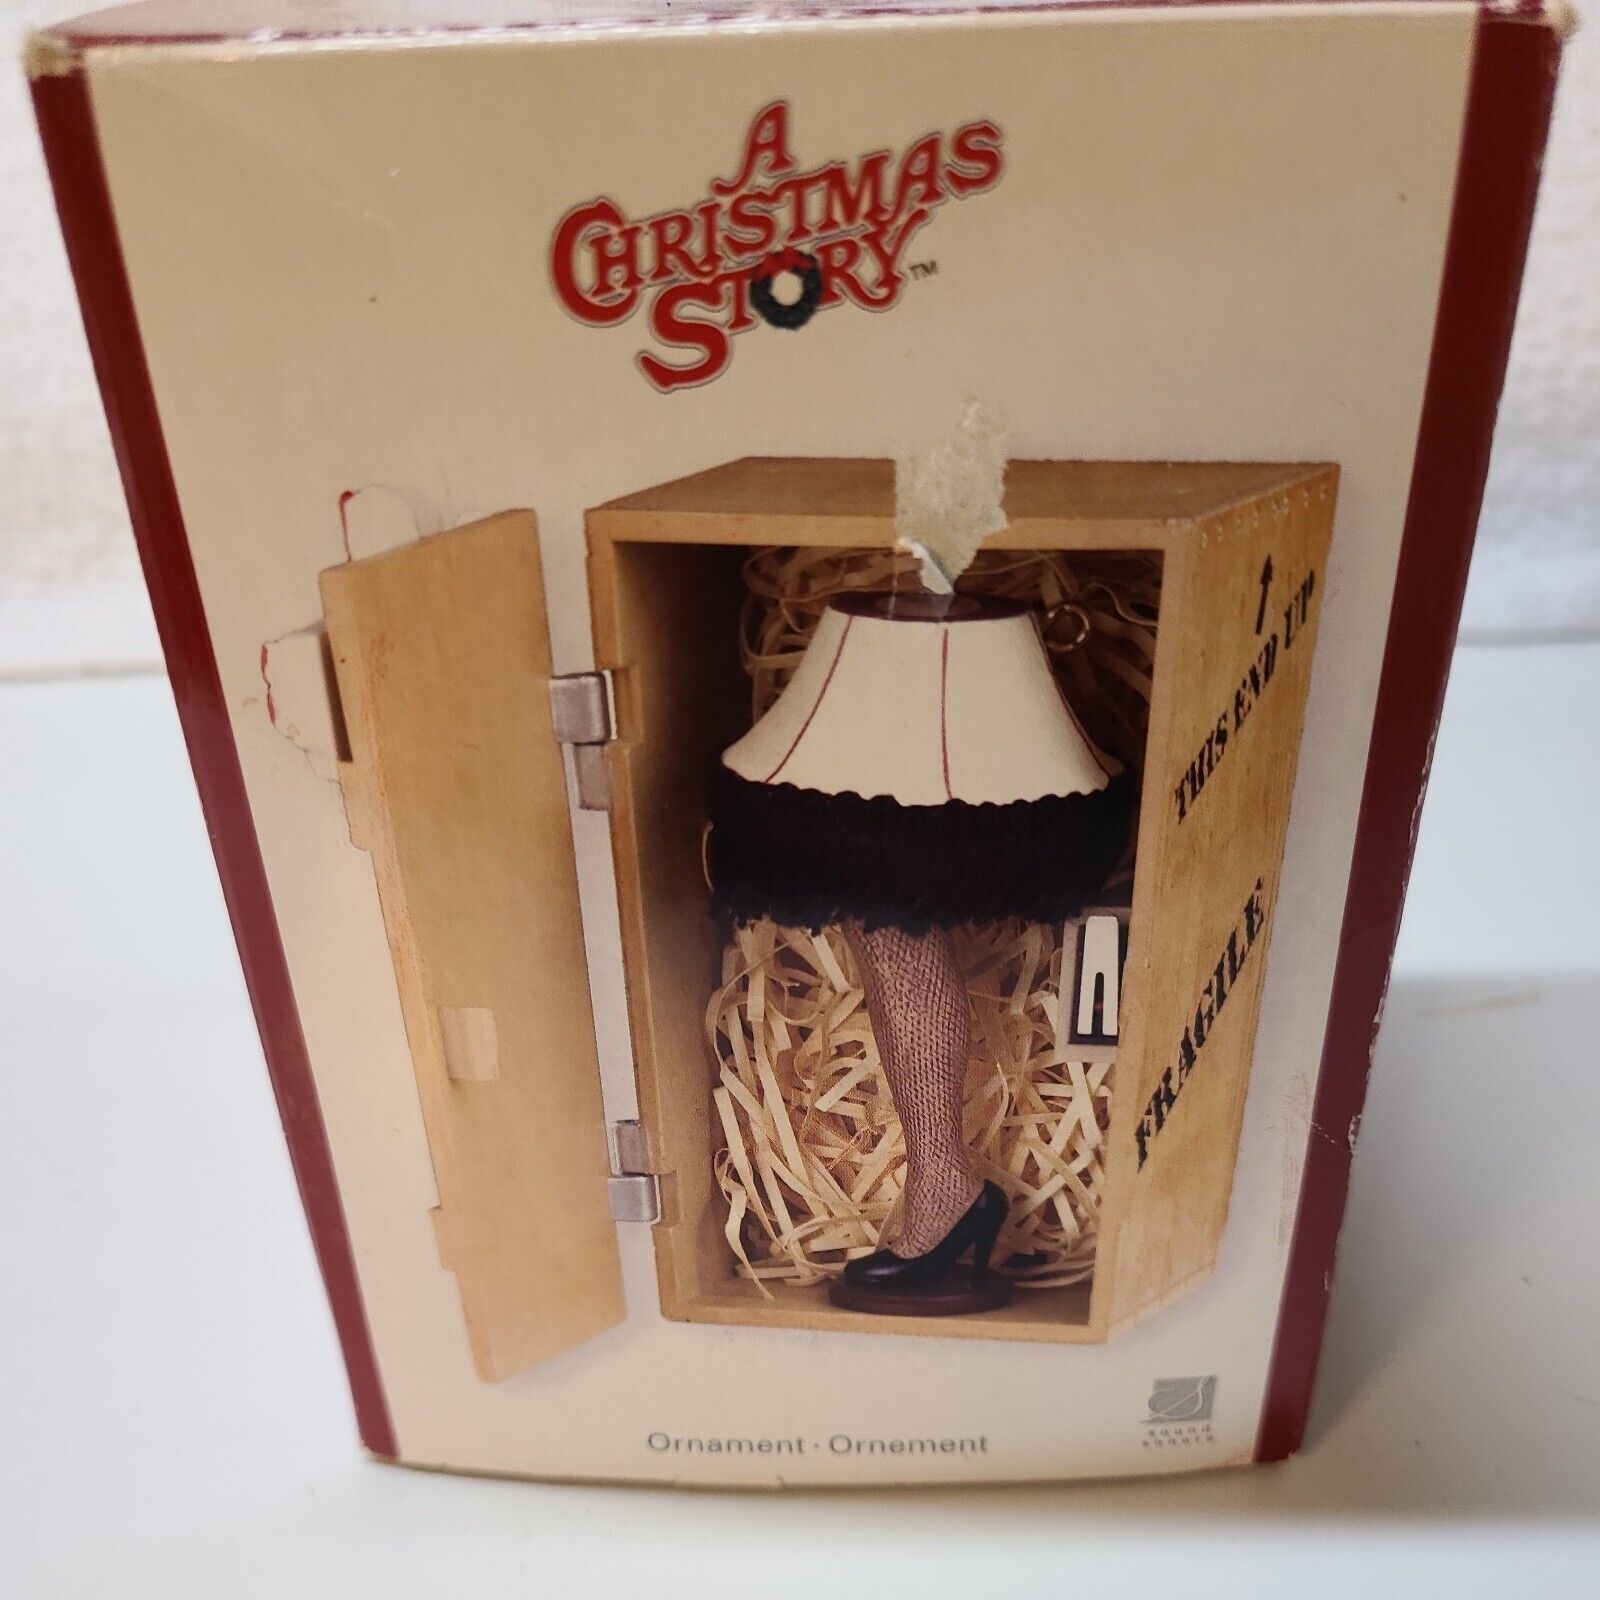 A Christmas Story Ornament, Plays 3 Quotes From Movie When Crate Is Opened.